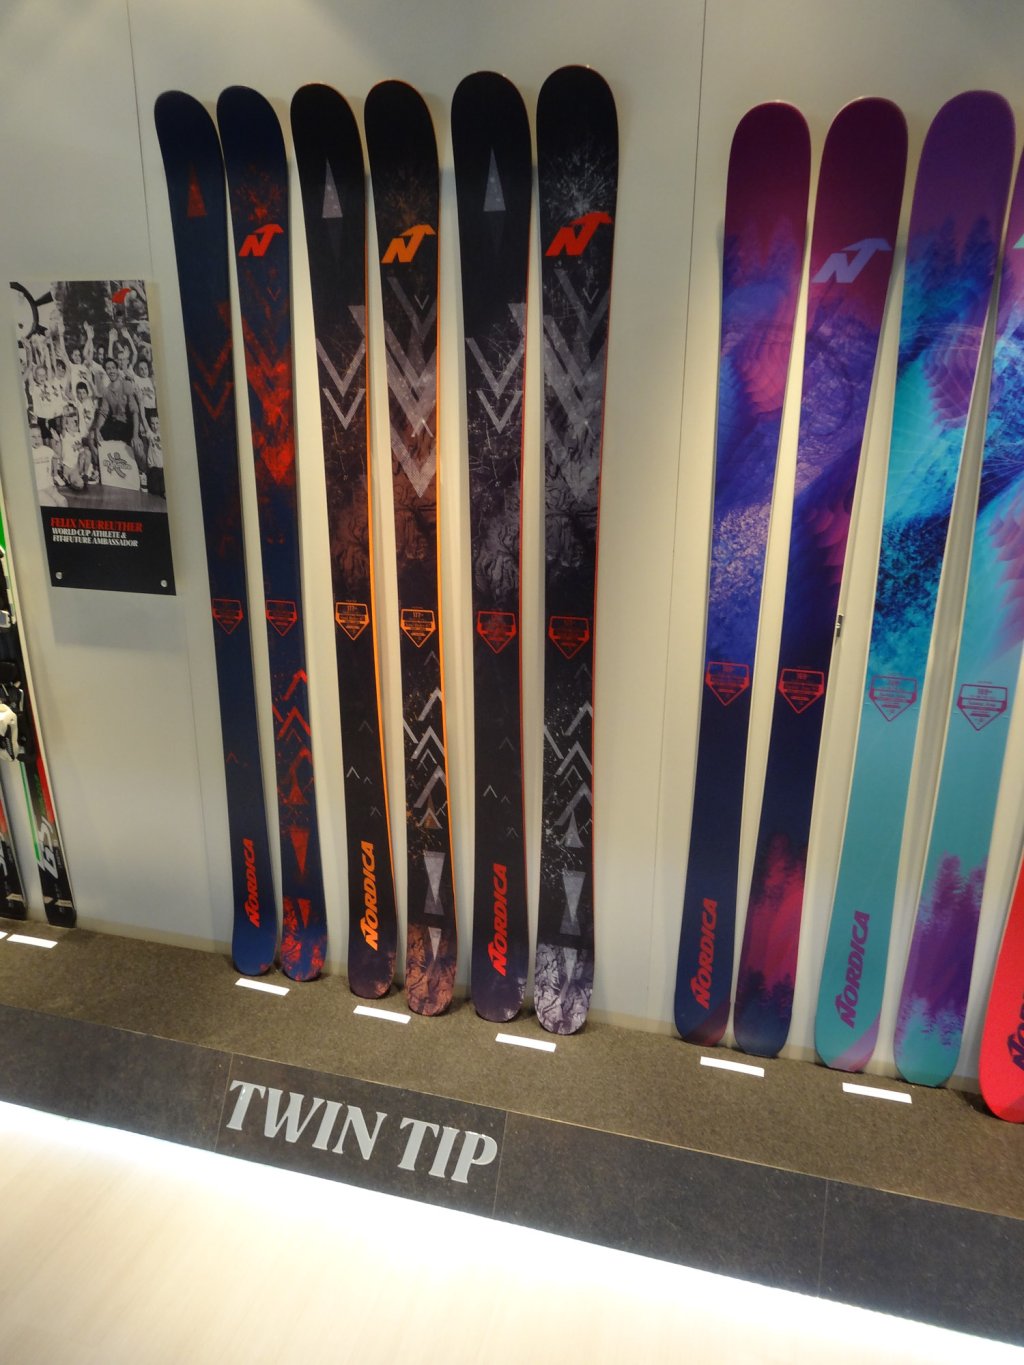 Nordica Soul Rider Park skis in various widths